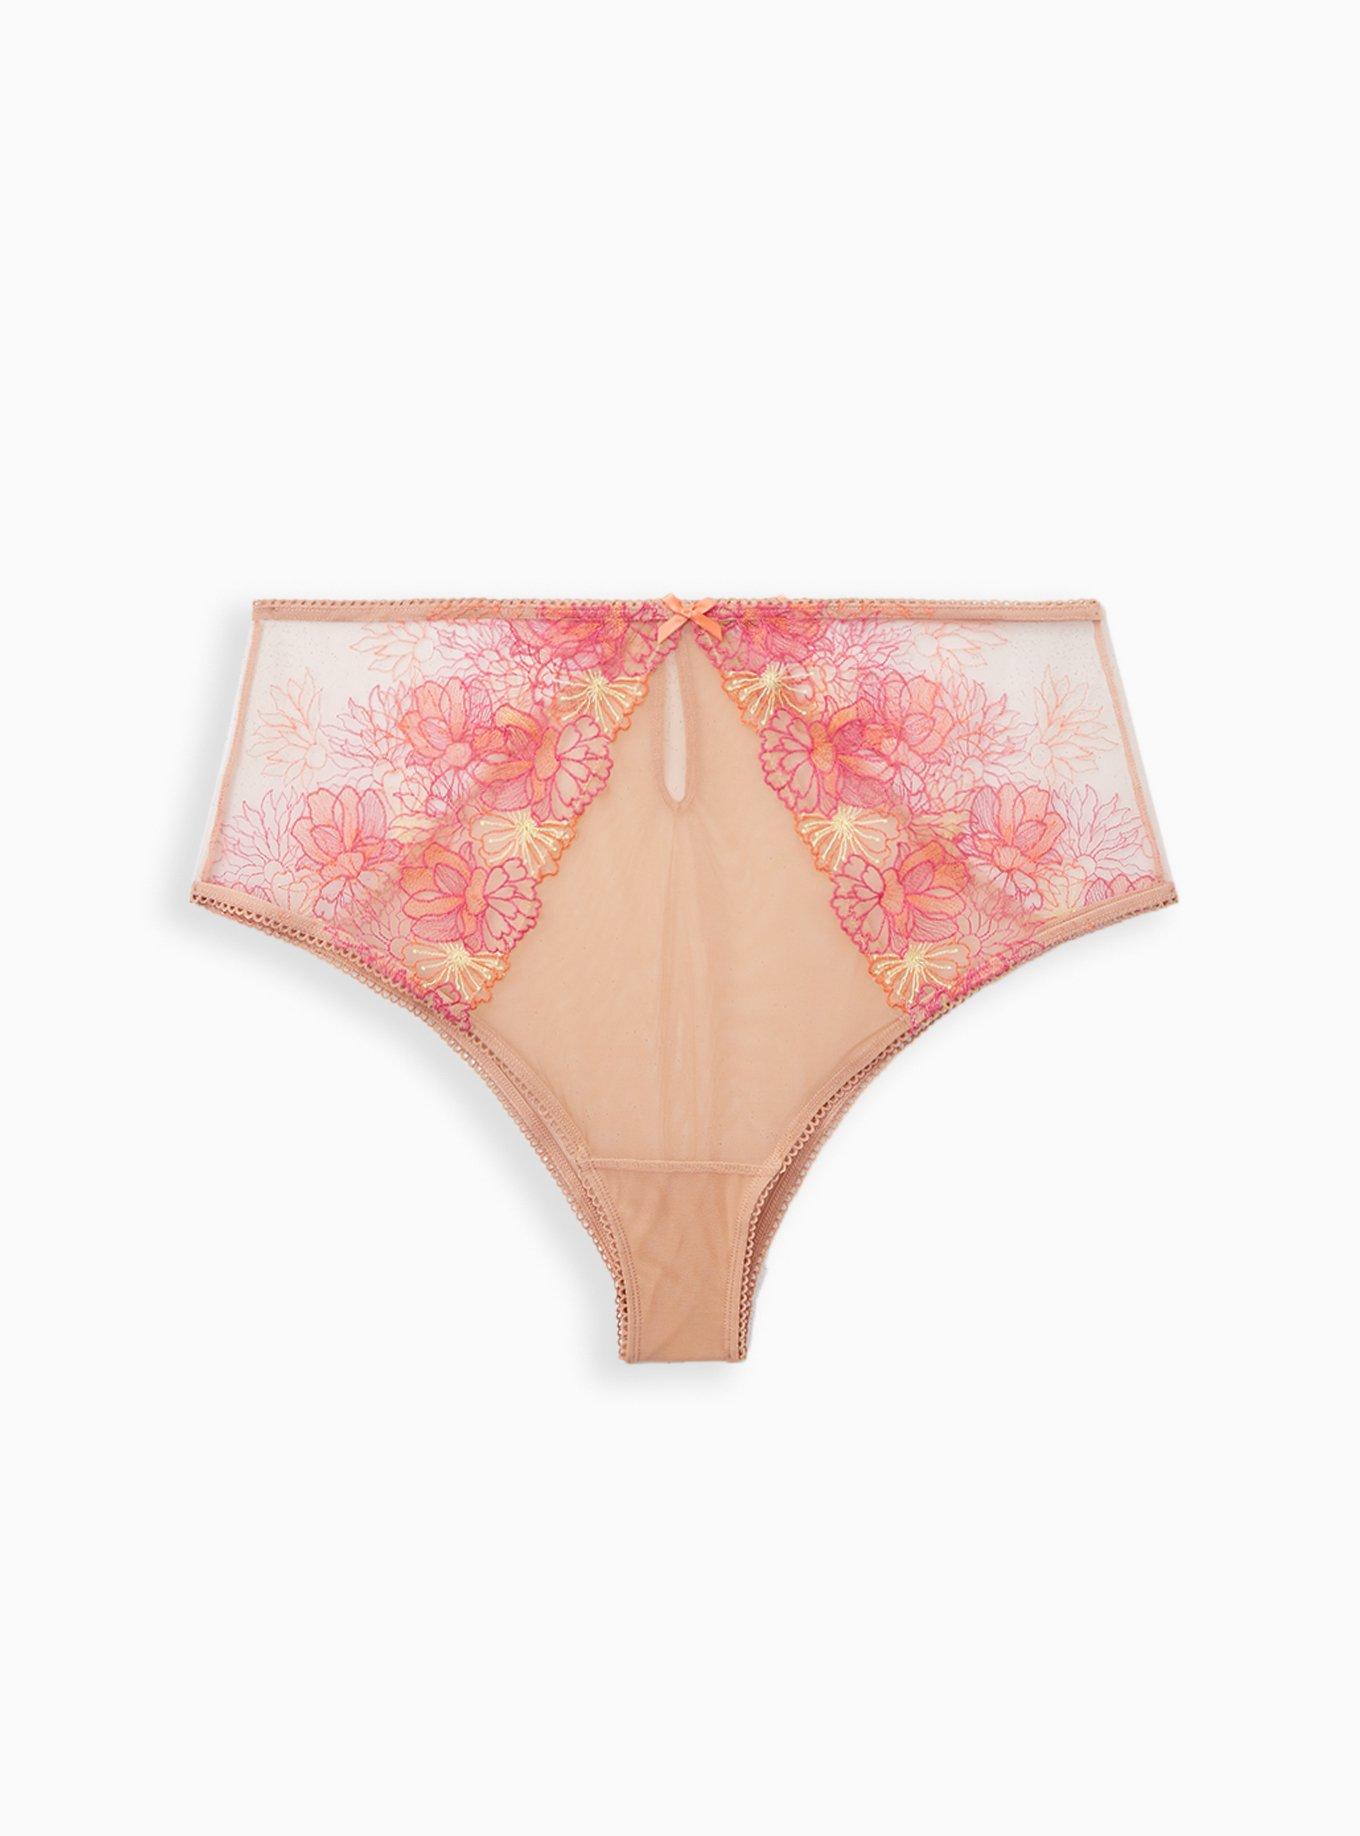 Plus Size - High Waist Panty - Embroidered Mesh Pink - Torrid